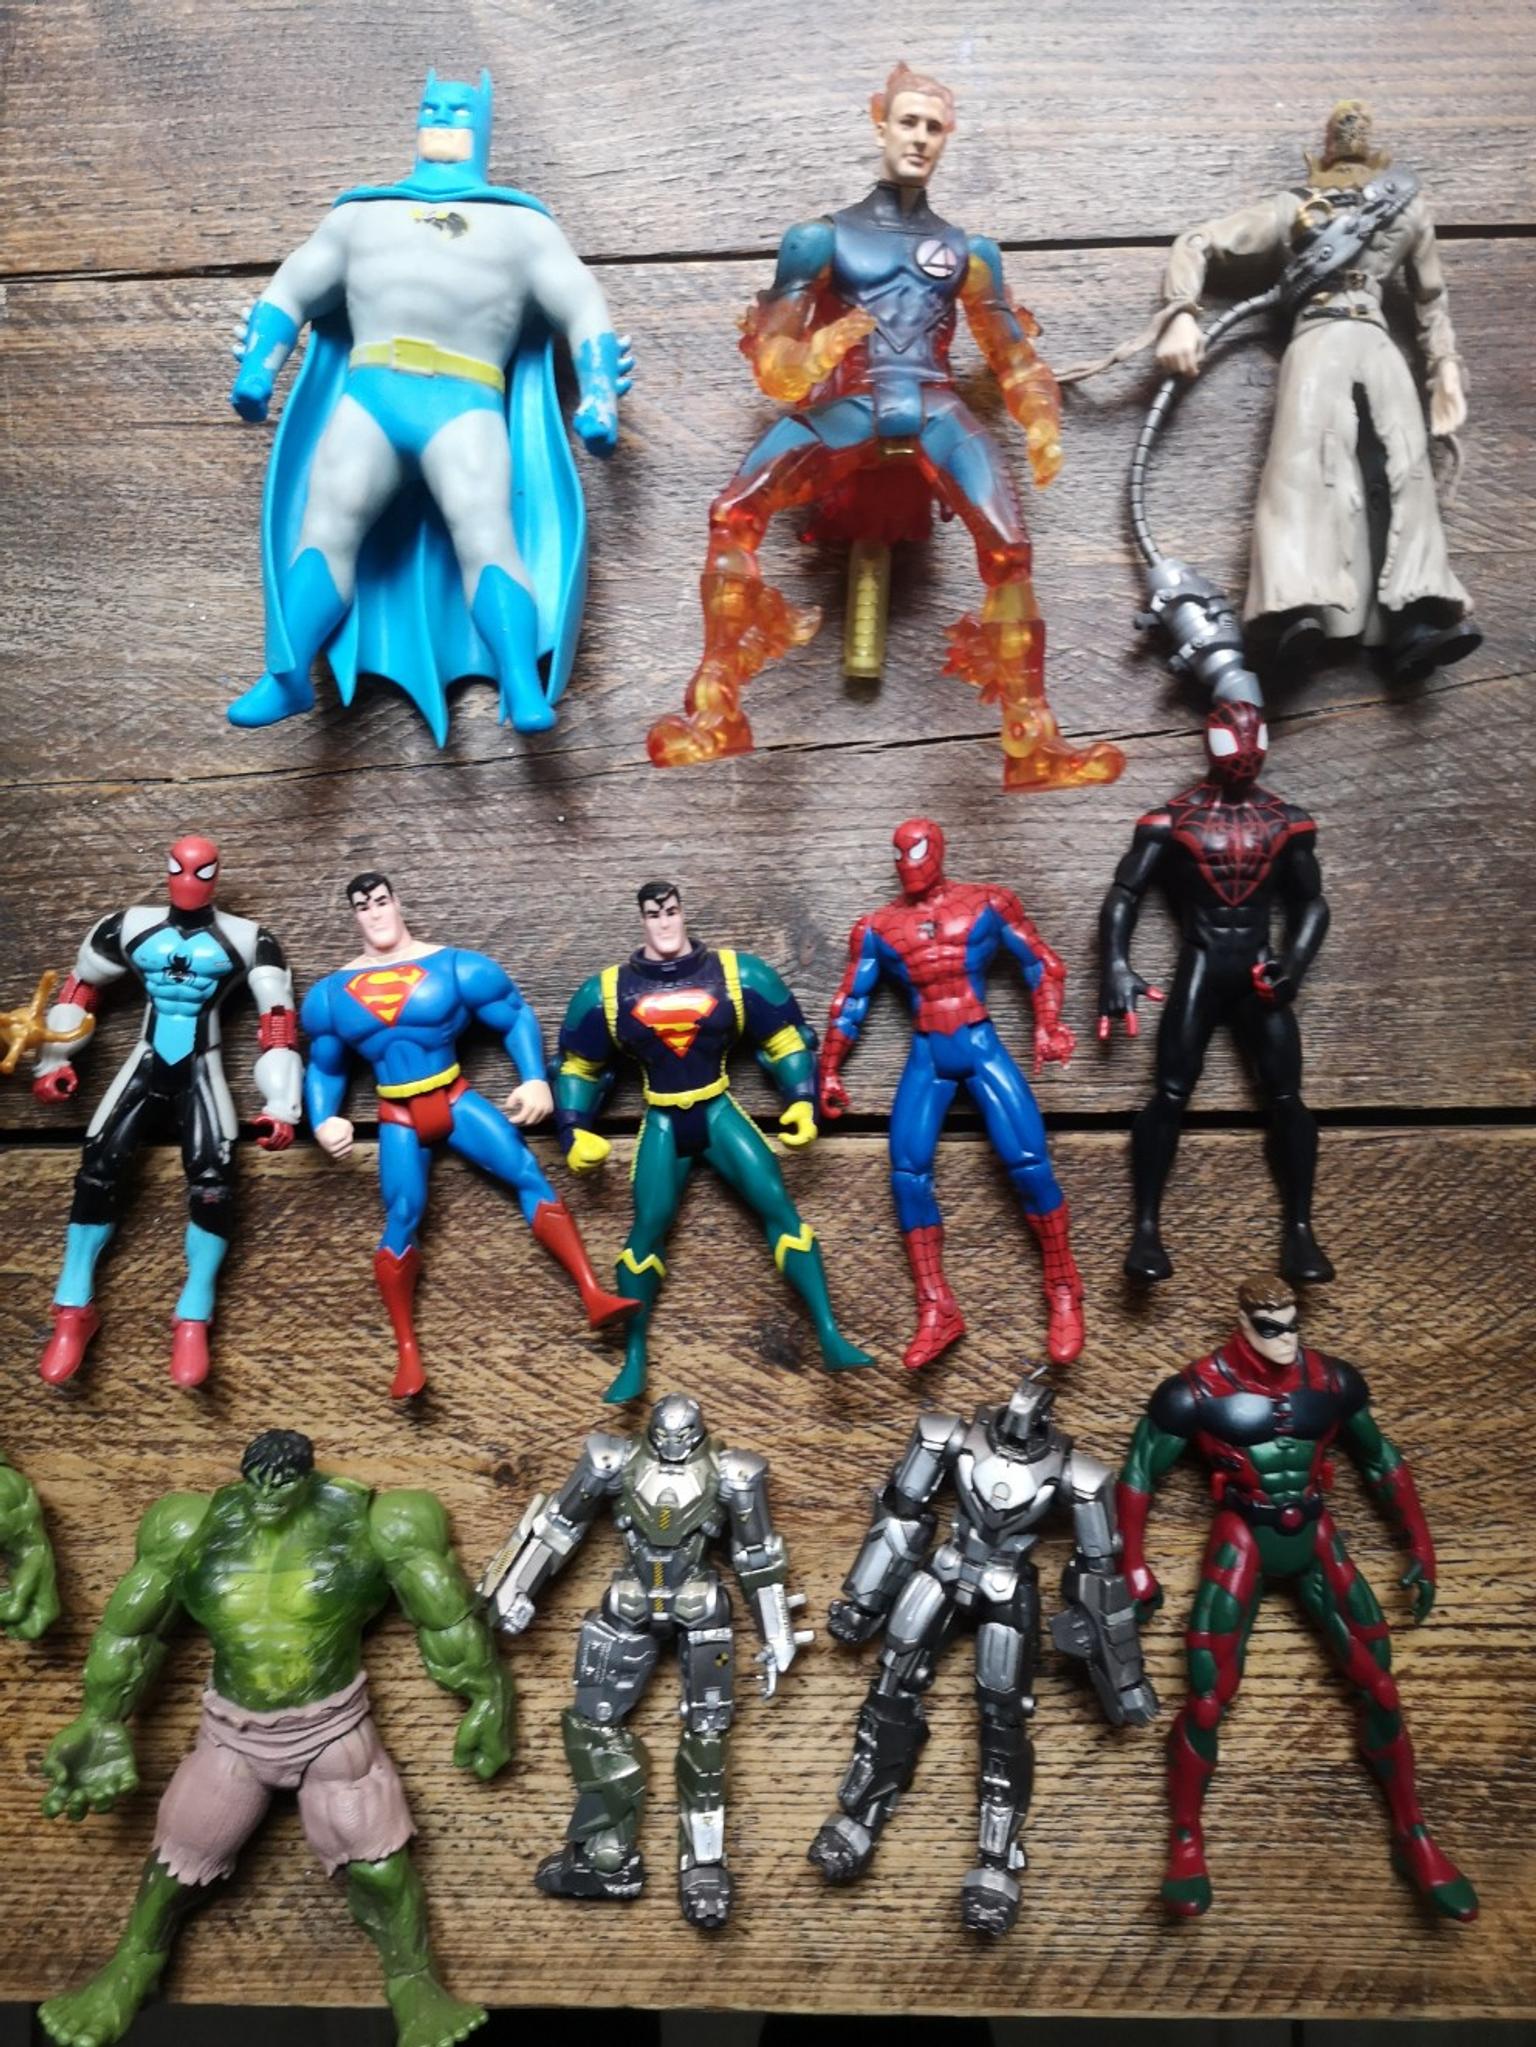 marvel and dc figures